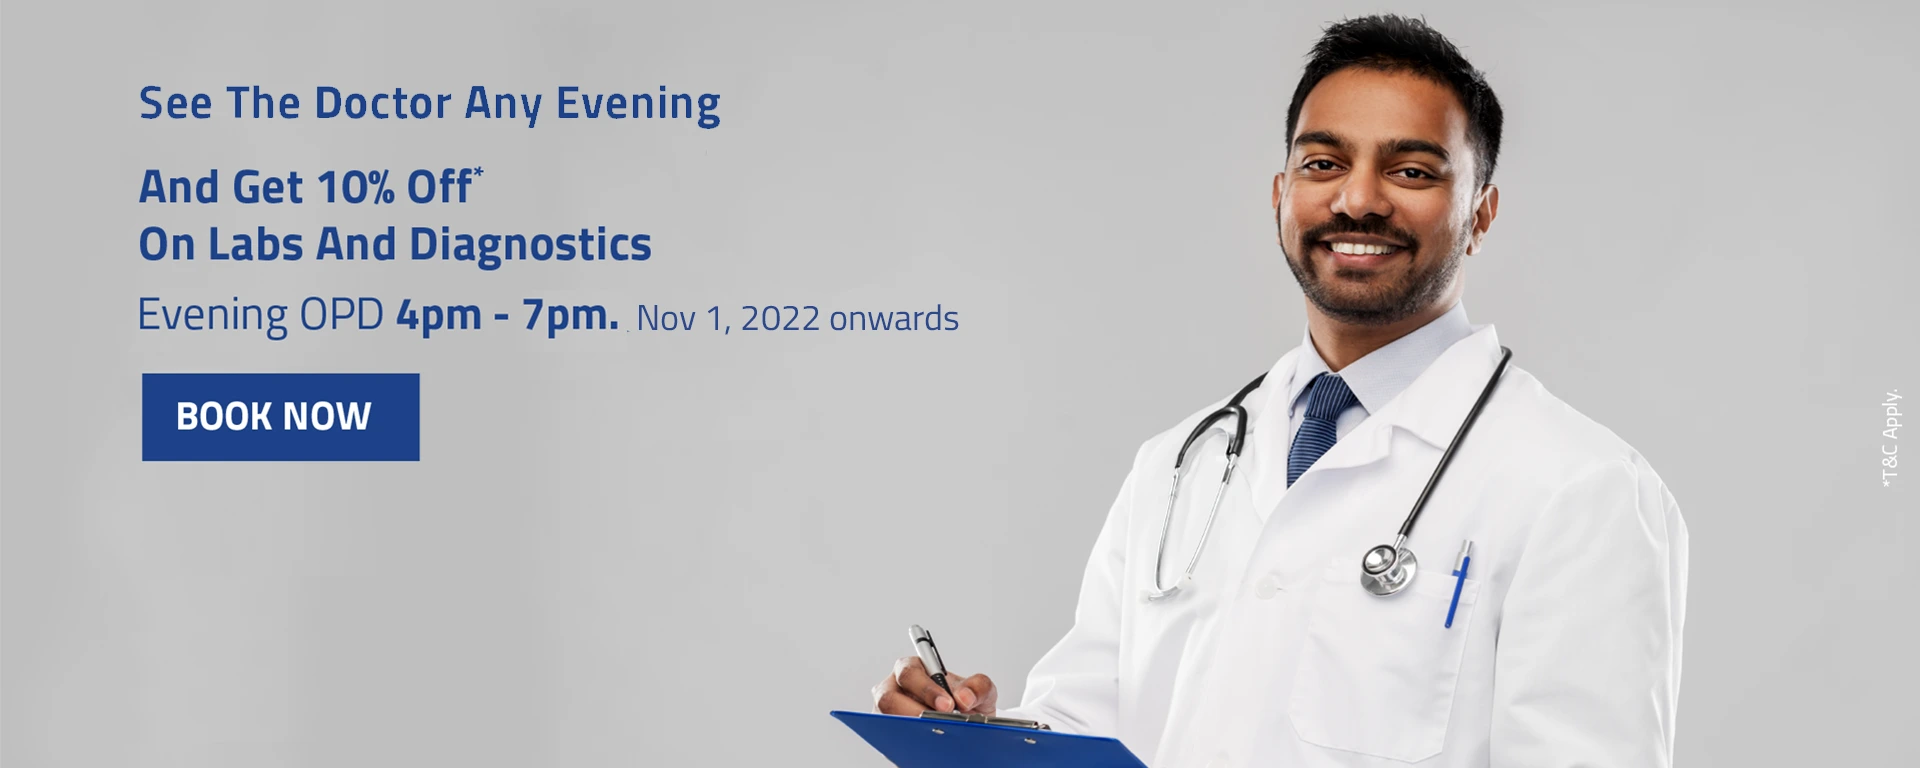 evening-opd-doctor-consultation-aster-rv-bangalore